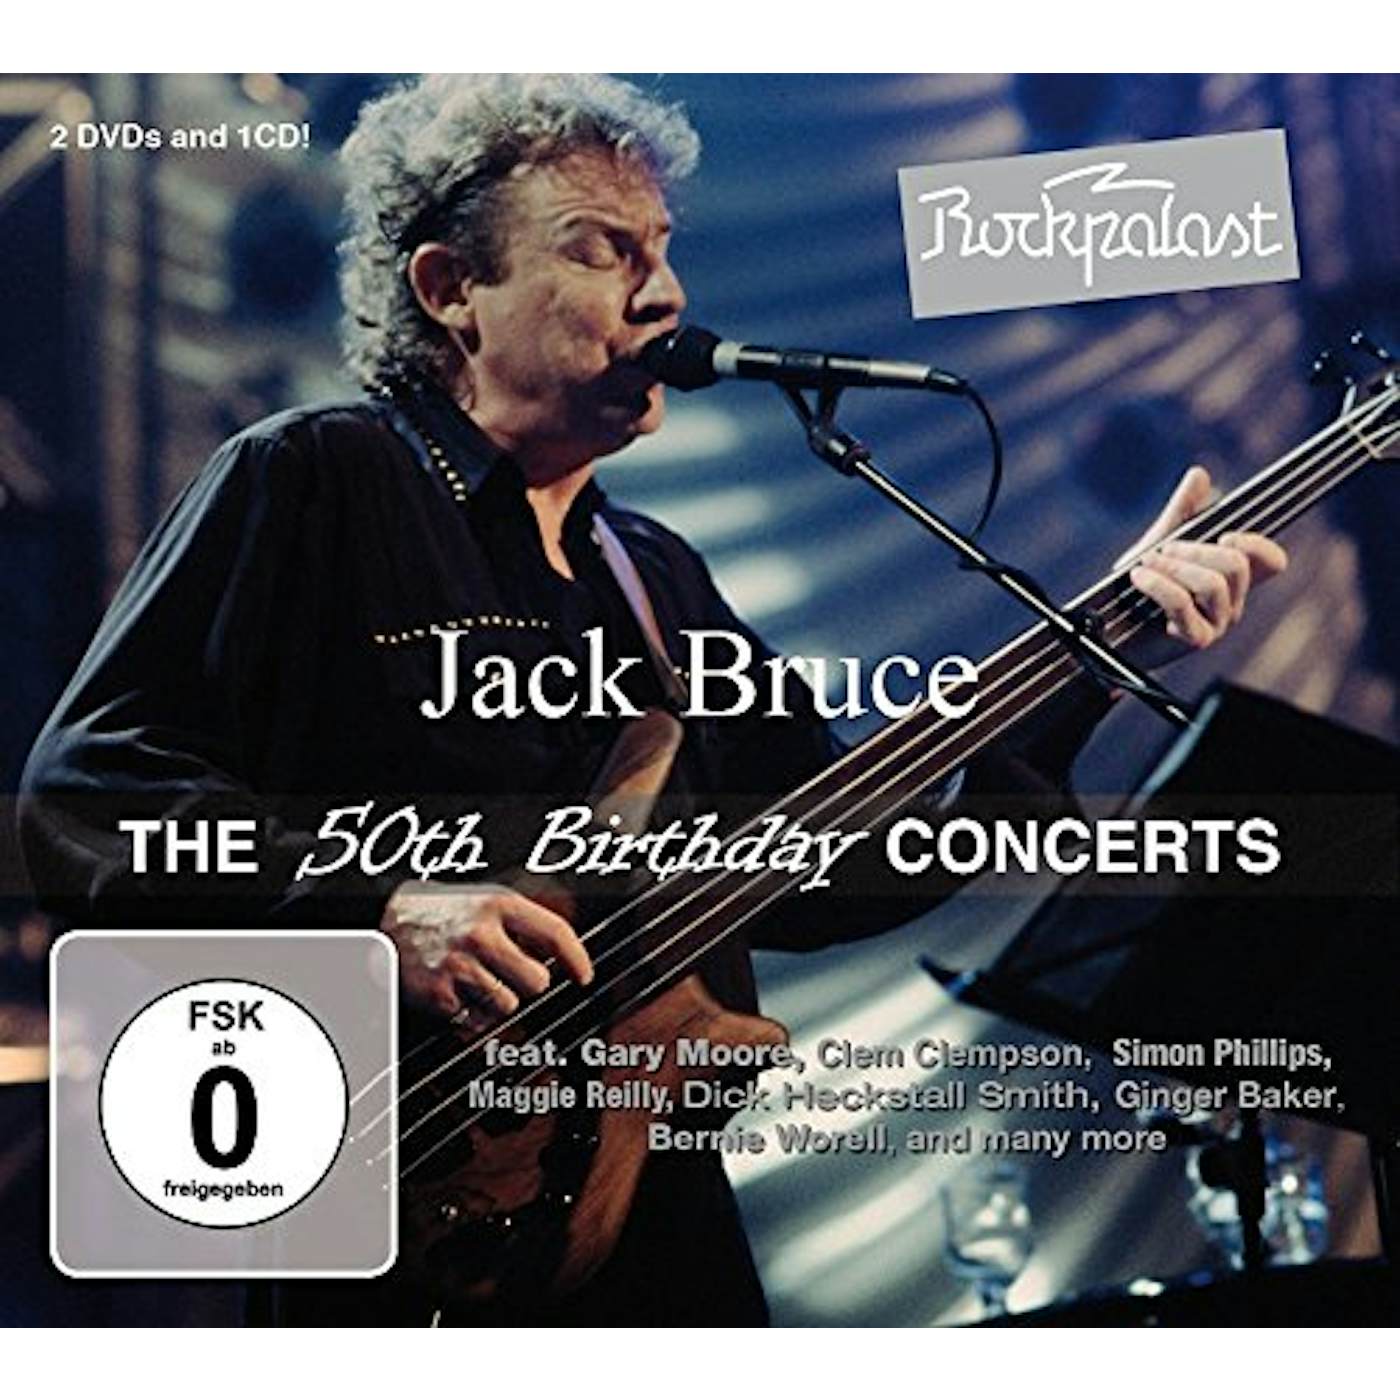 Jack Bruce ROCKPALAST: THE 50TH BIRTHDAY CONCERTS CD